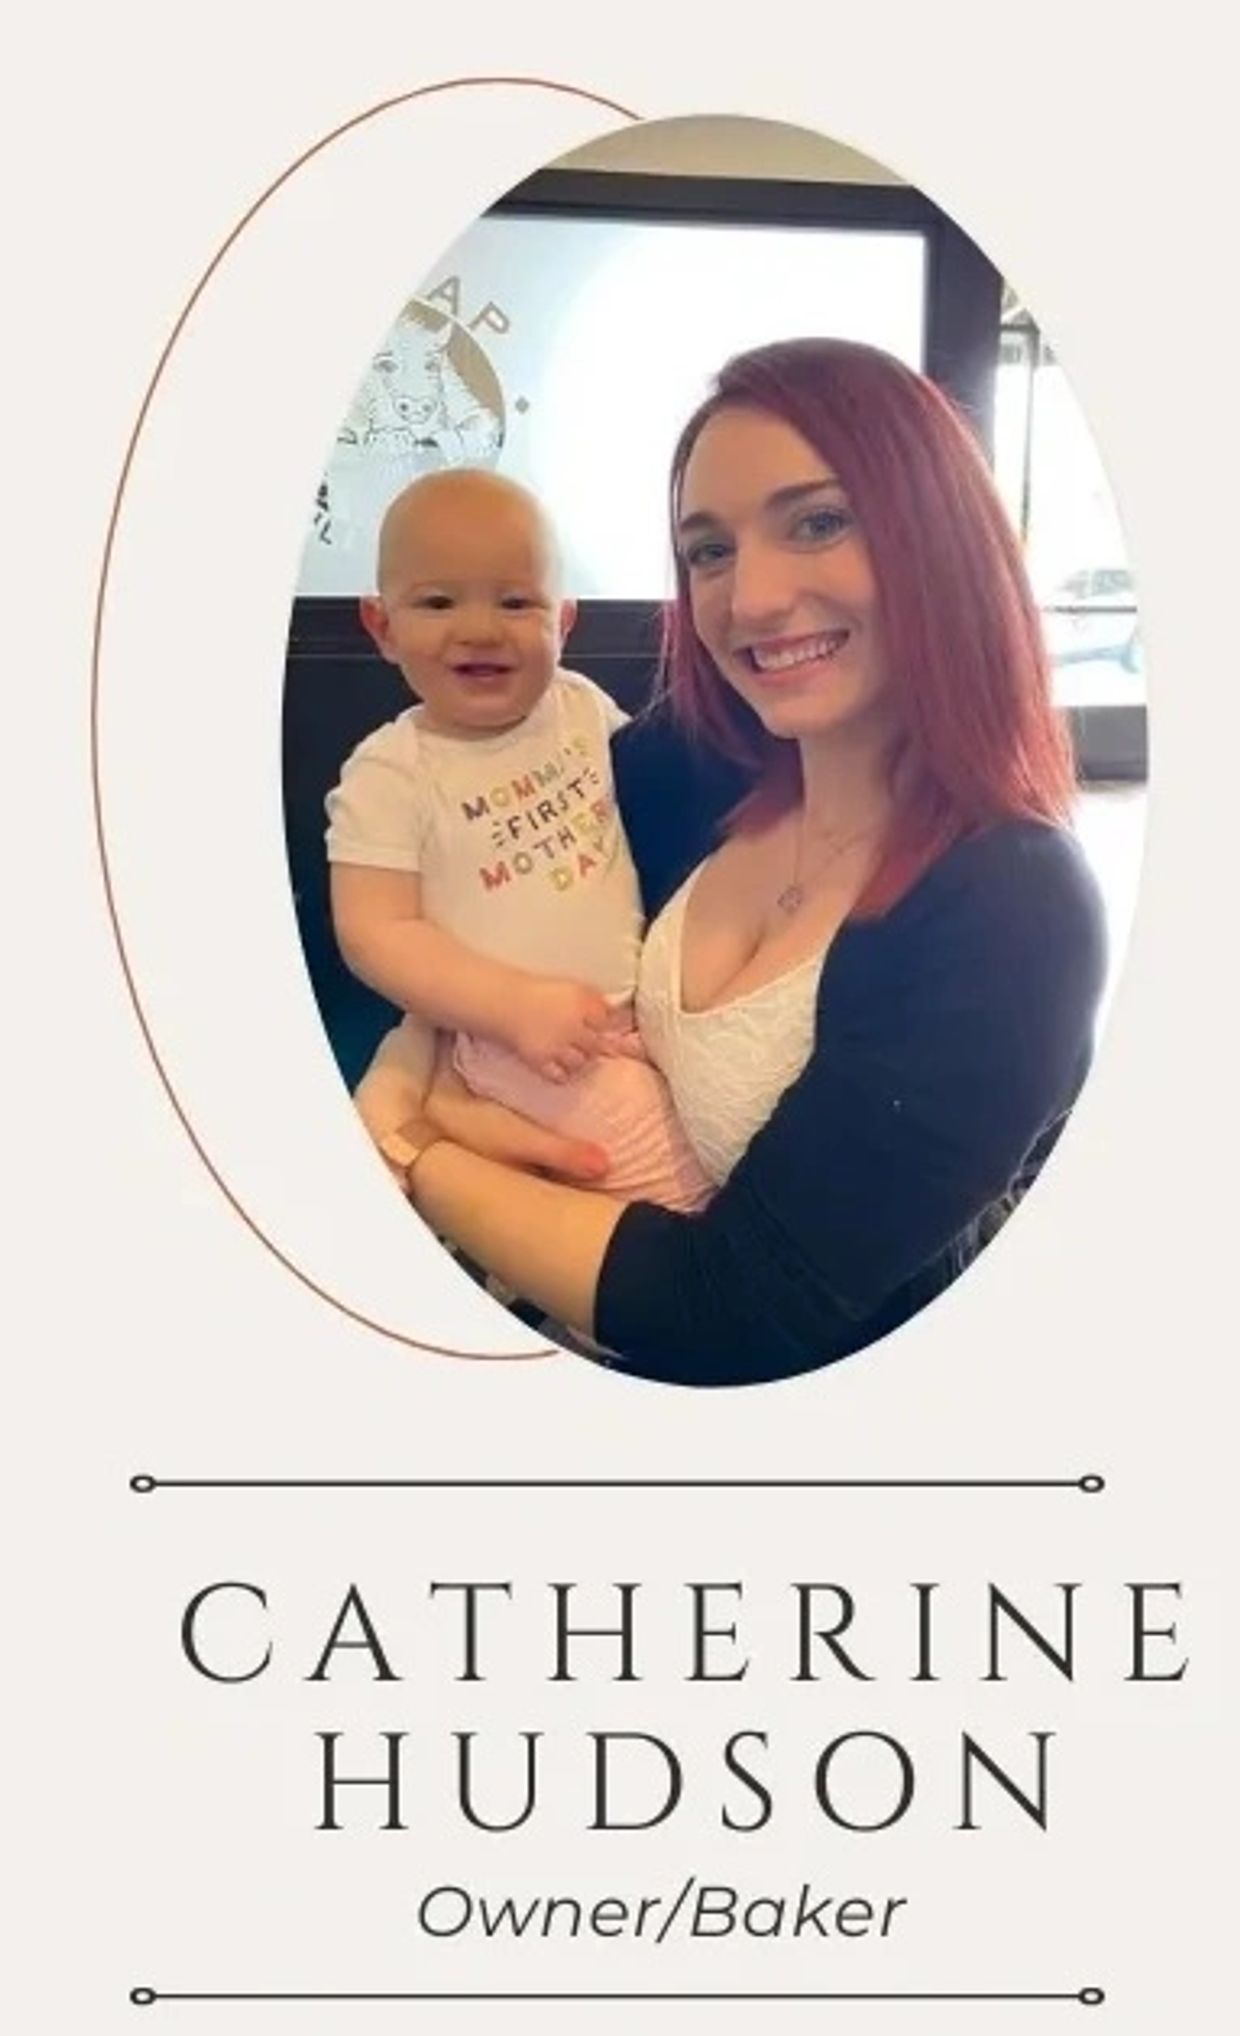 Catherine Hudson and her son Eli!